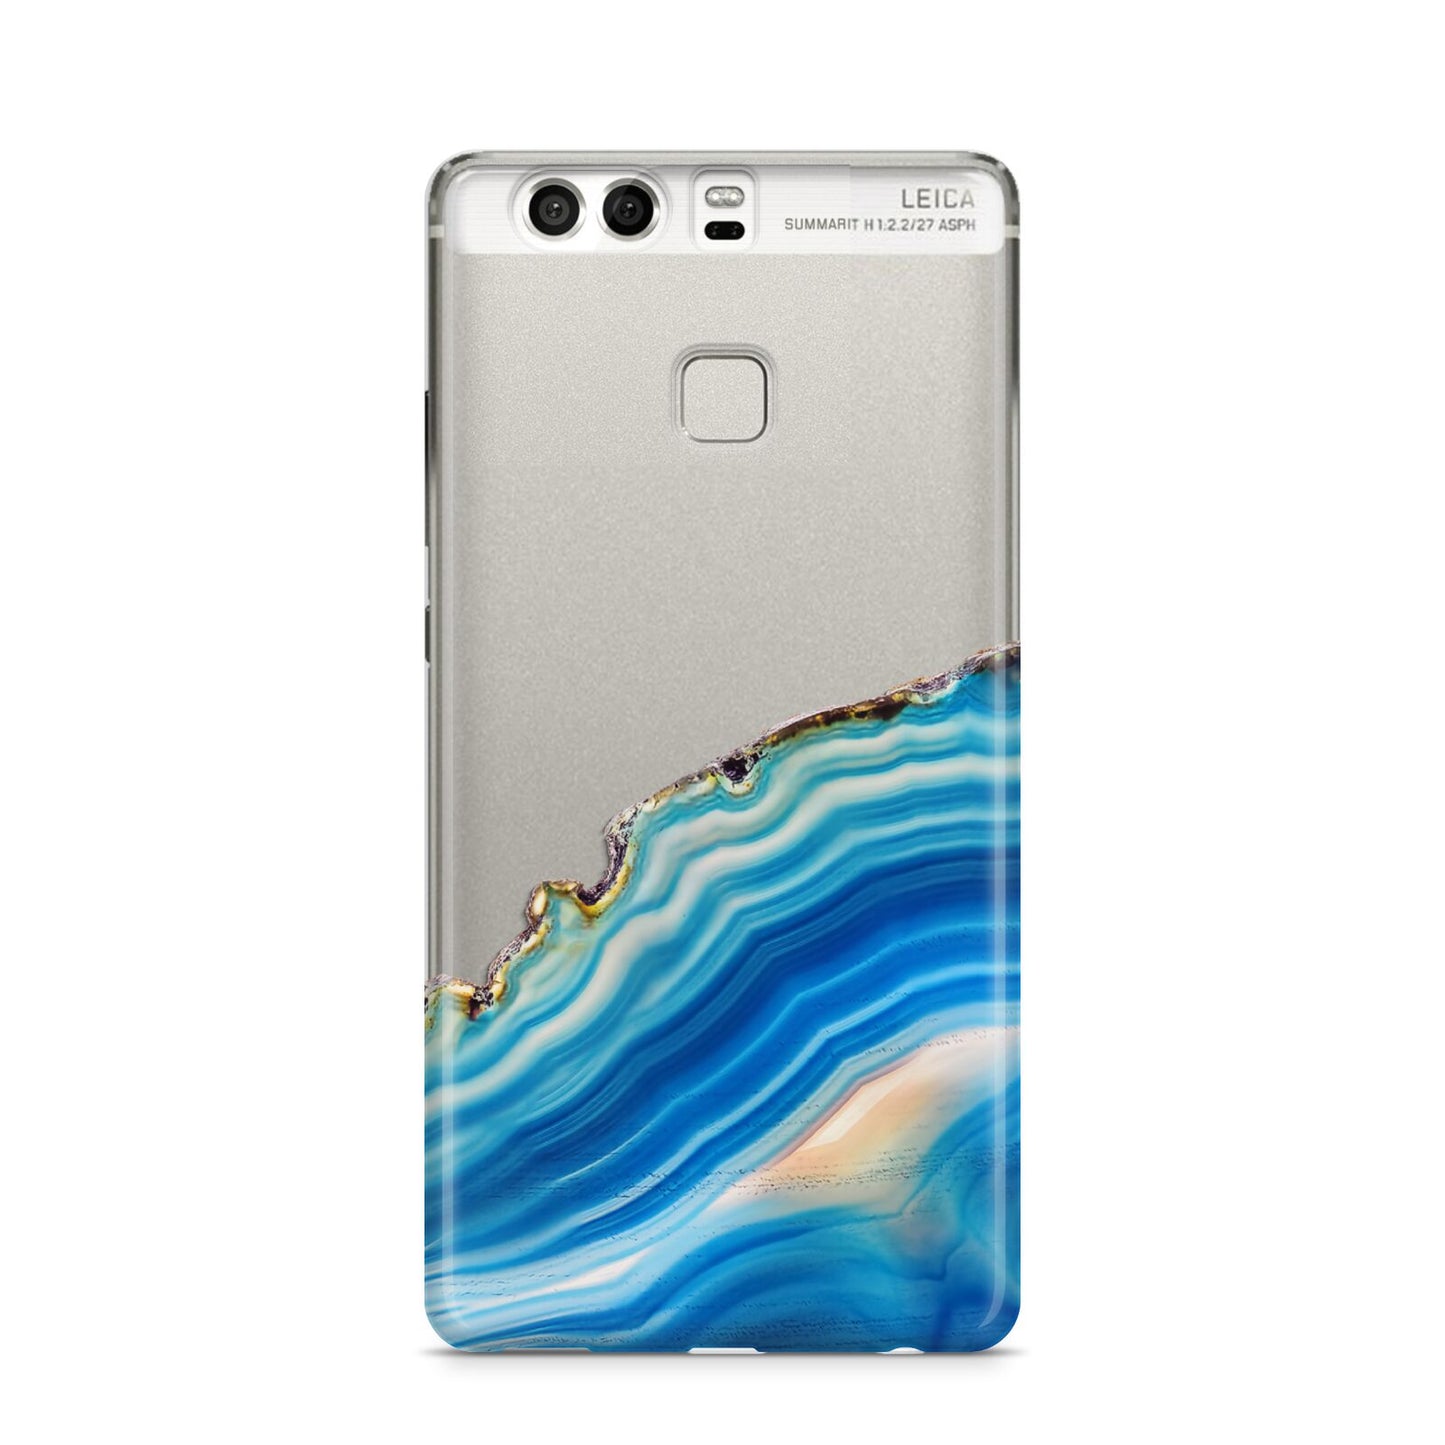 Agate Pale Blue and Bright Blue Huawei P9 Case